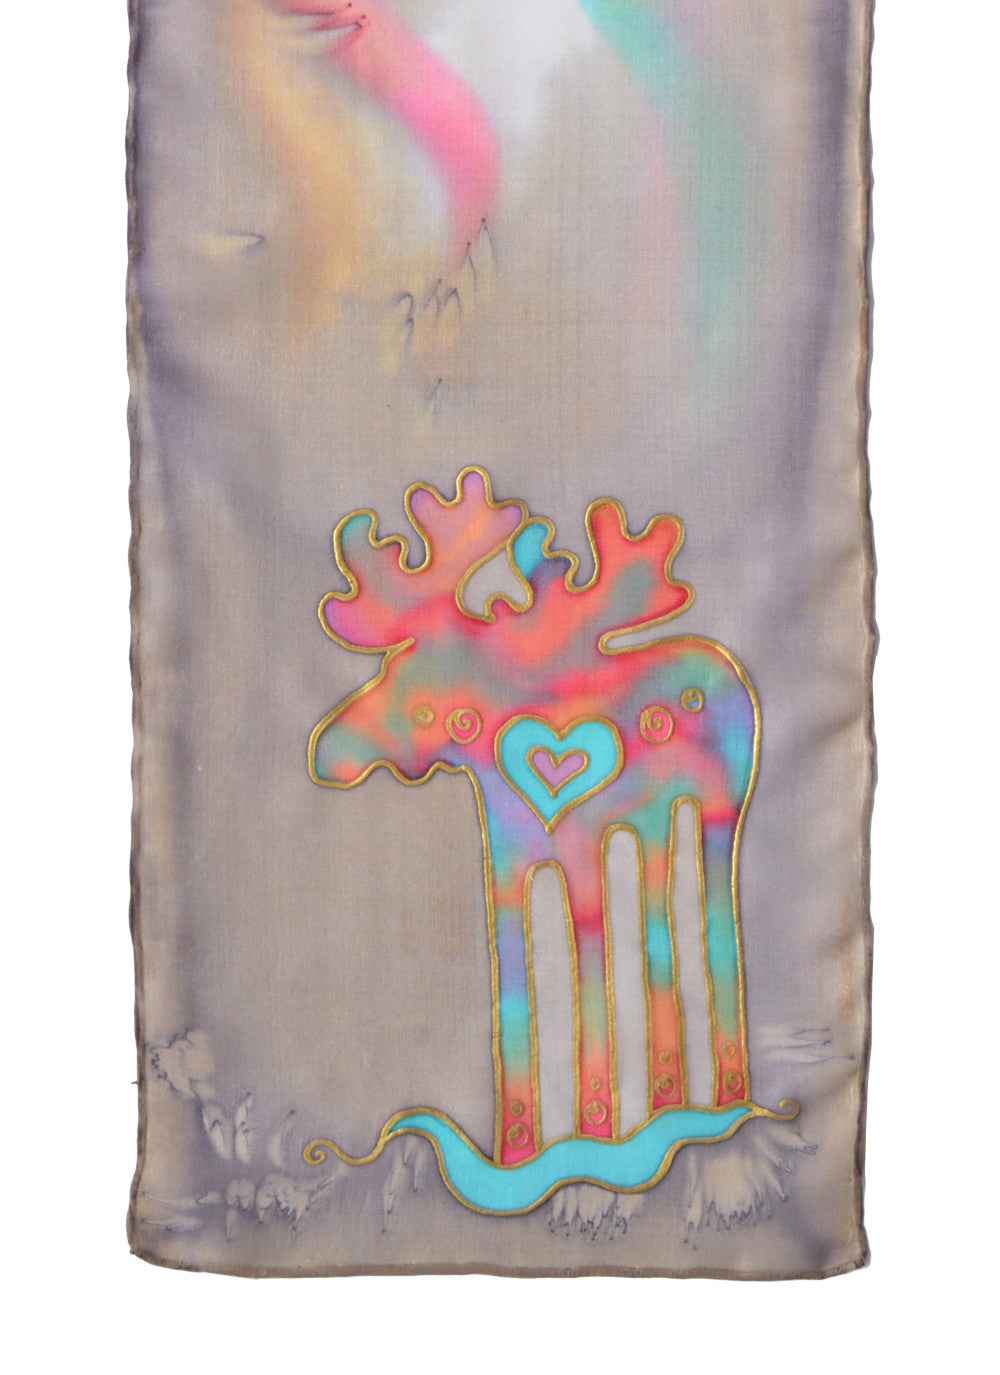 Hand-painted silk scarf with Canadian moose design in desert sand (taupe)